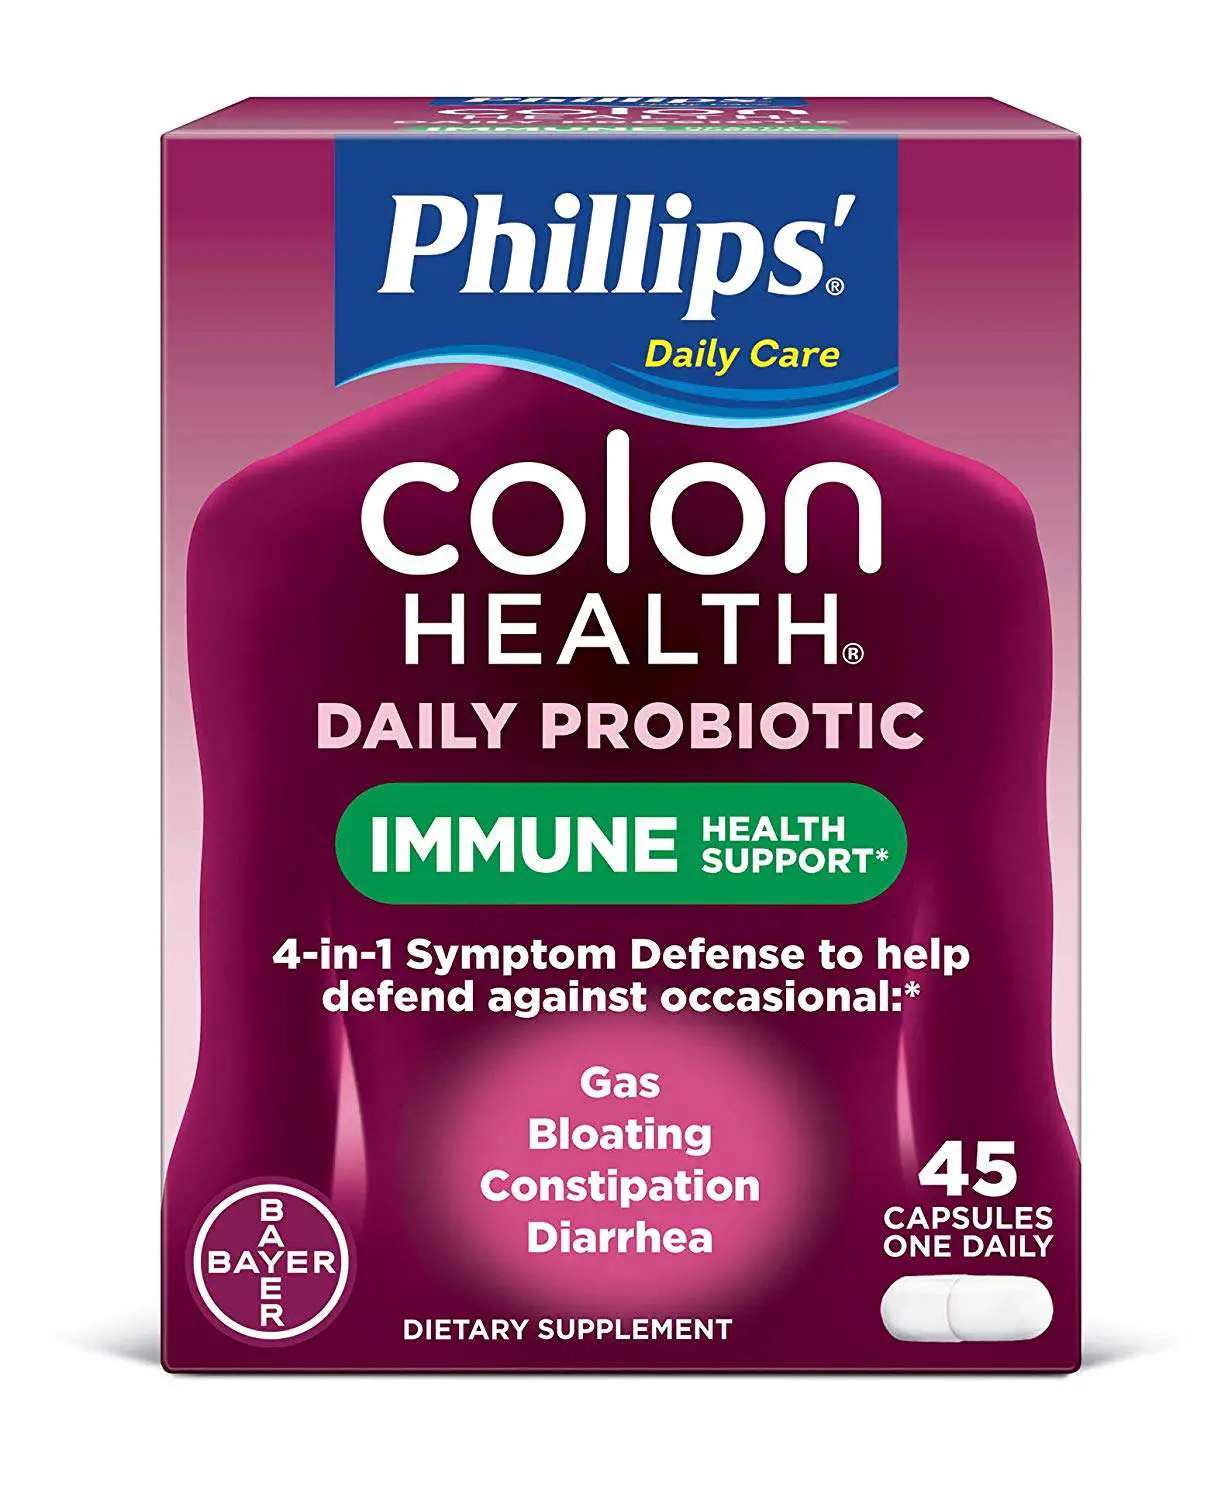 Phillips Colon Health Daily Probiotic 4 In 1 Immune Support 45 Caps ...